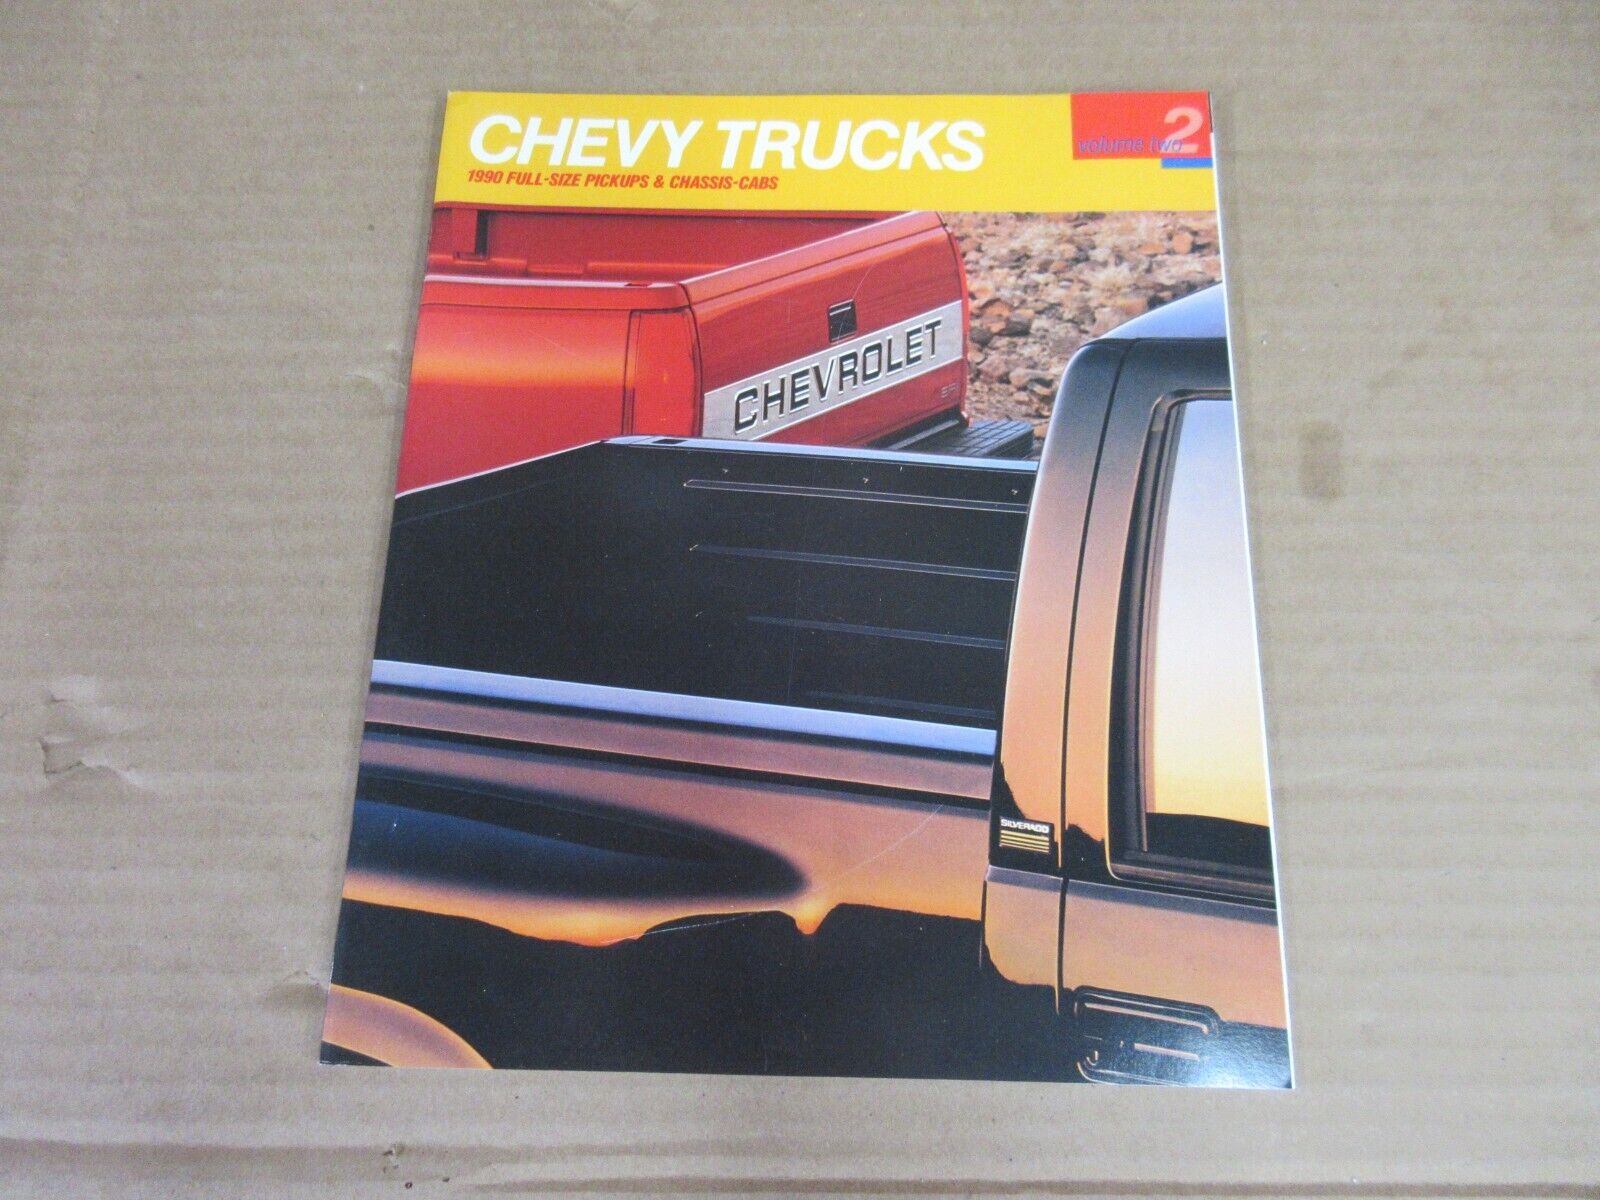 Vintage 1990 Chevy Trucks Full Size Pick-Ups and Chassis Cars Vol 2 Brochure  E2